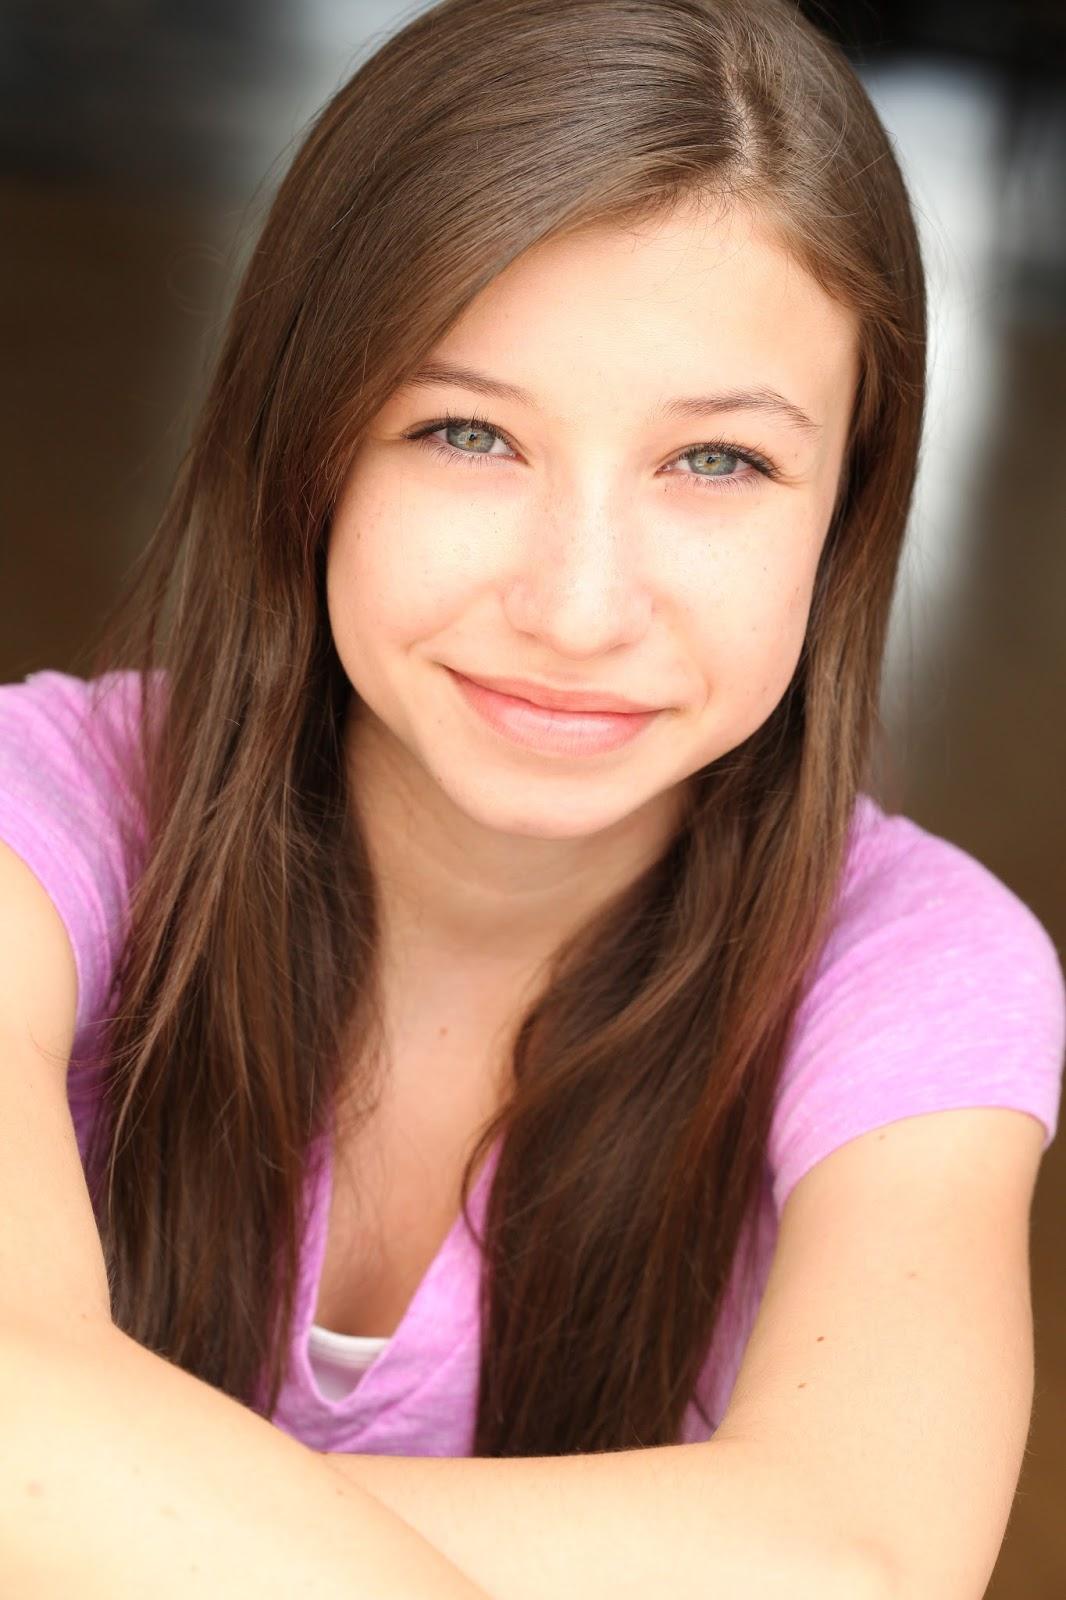 70+ Hot Pictures Of Katelyn Nacon Which Are Sure to Catch Your Attention 165